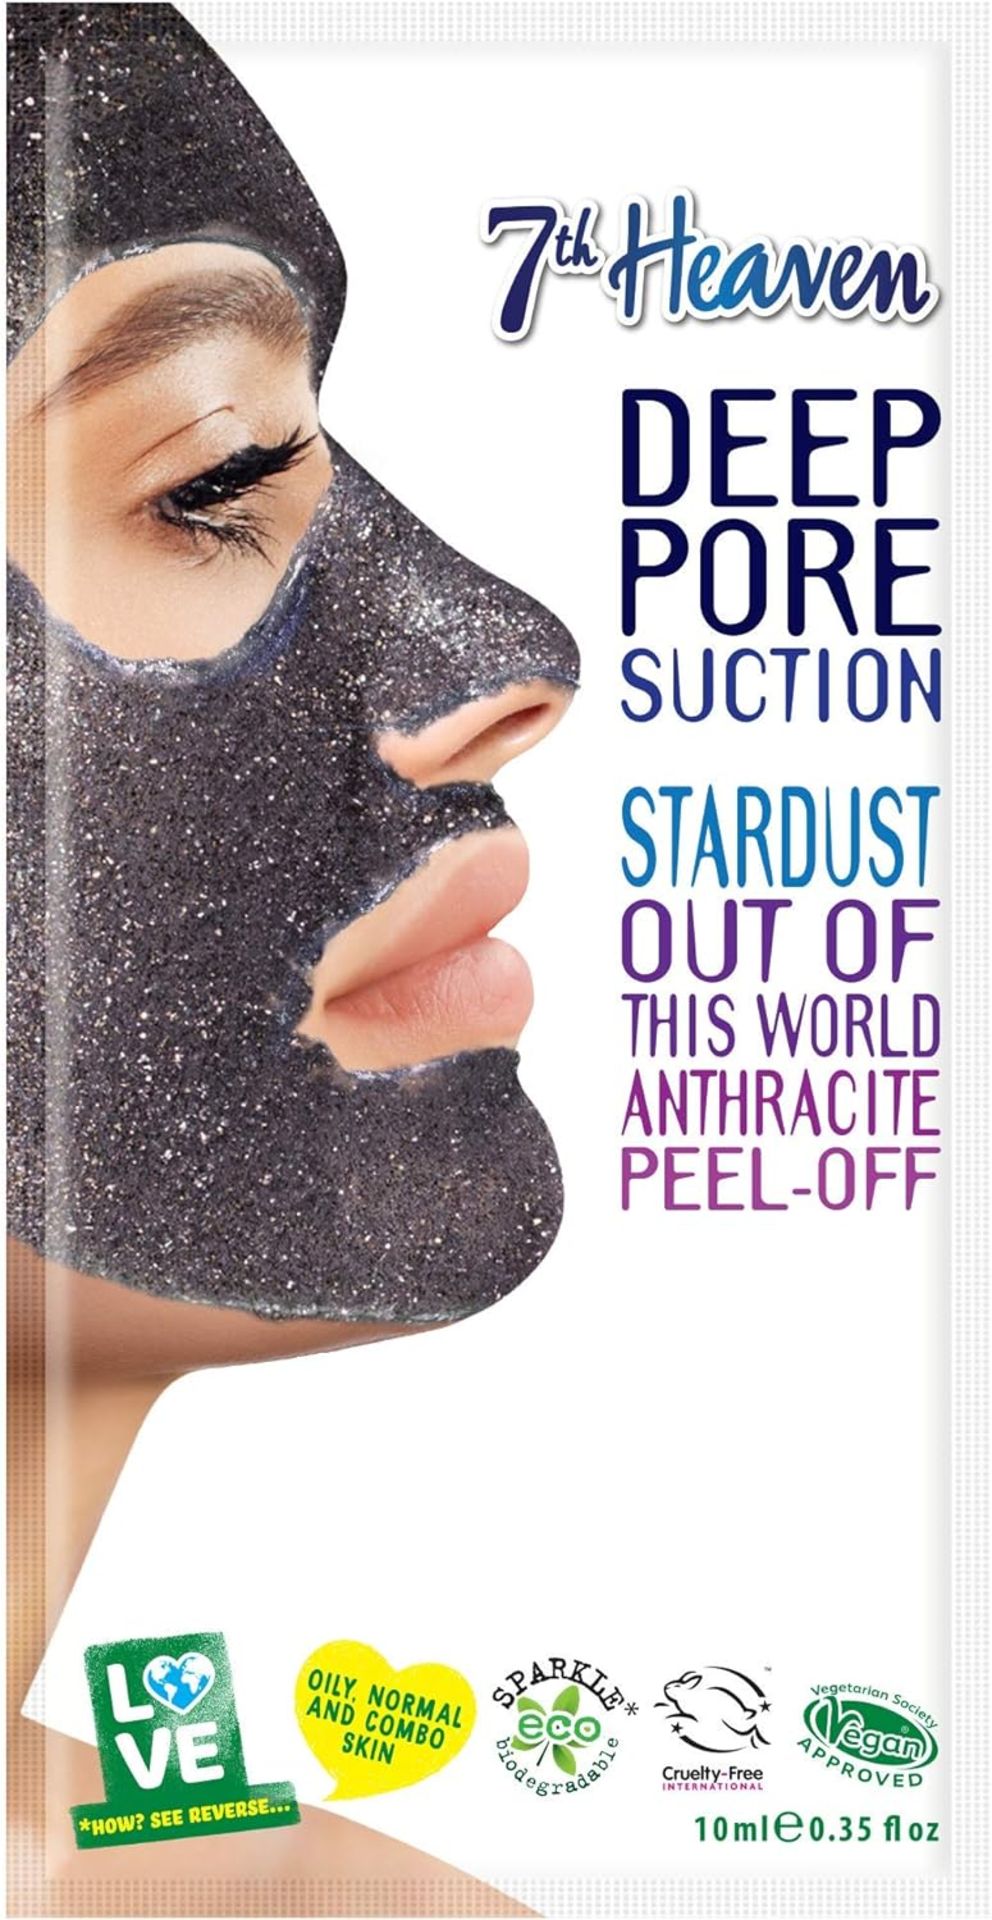 228 X BRAND NEW 7TH HEAVEN DEEP PORE SUCTION STARDUST ANTHRACITE PEEL OFF MASKS EBR7